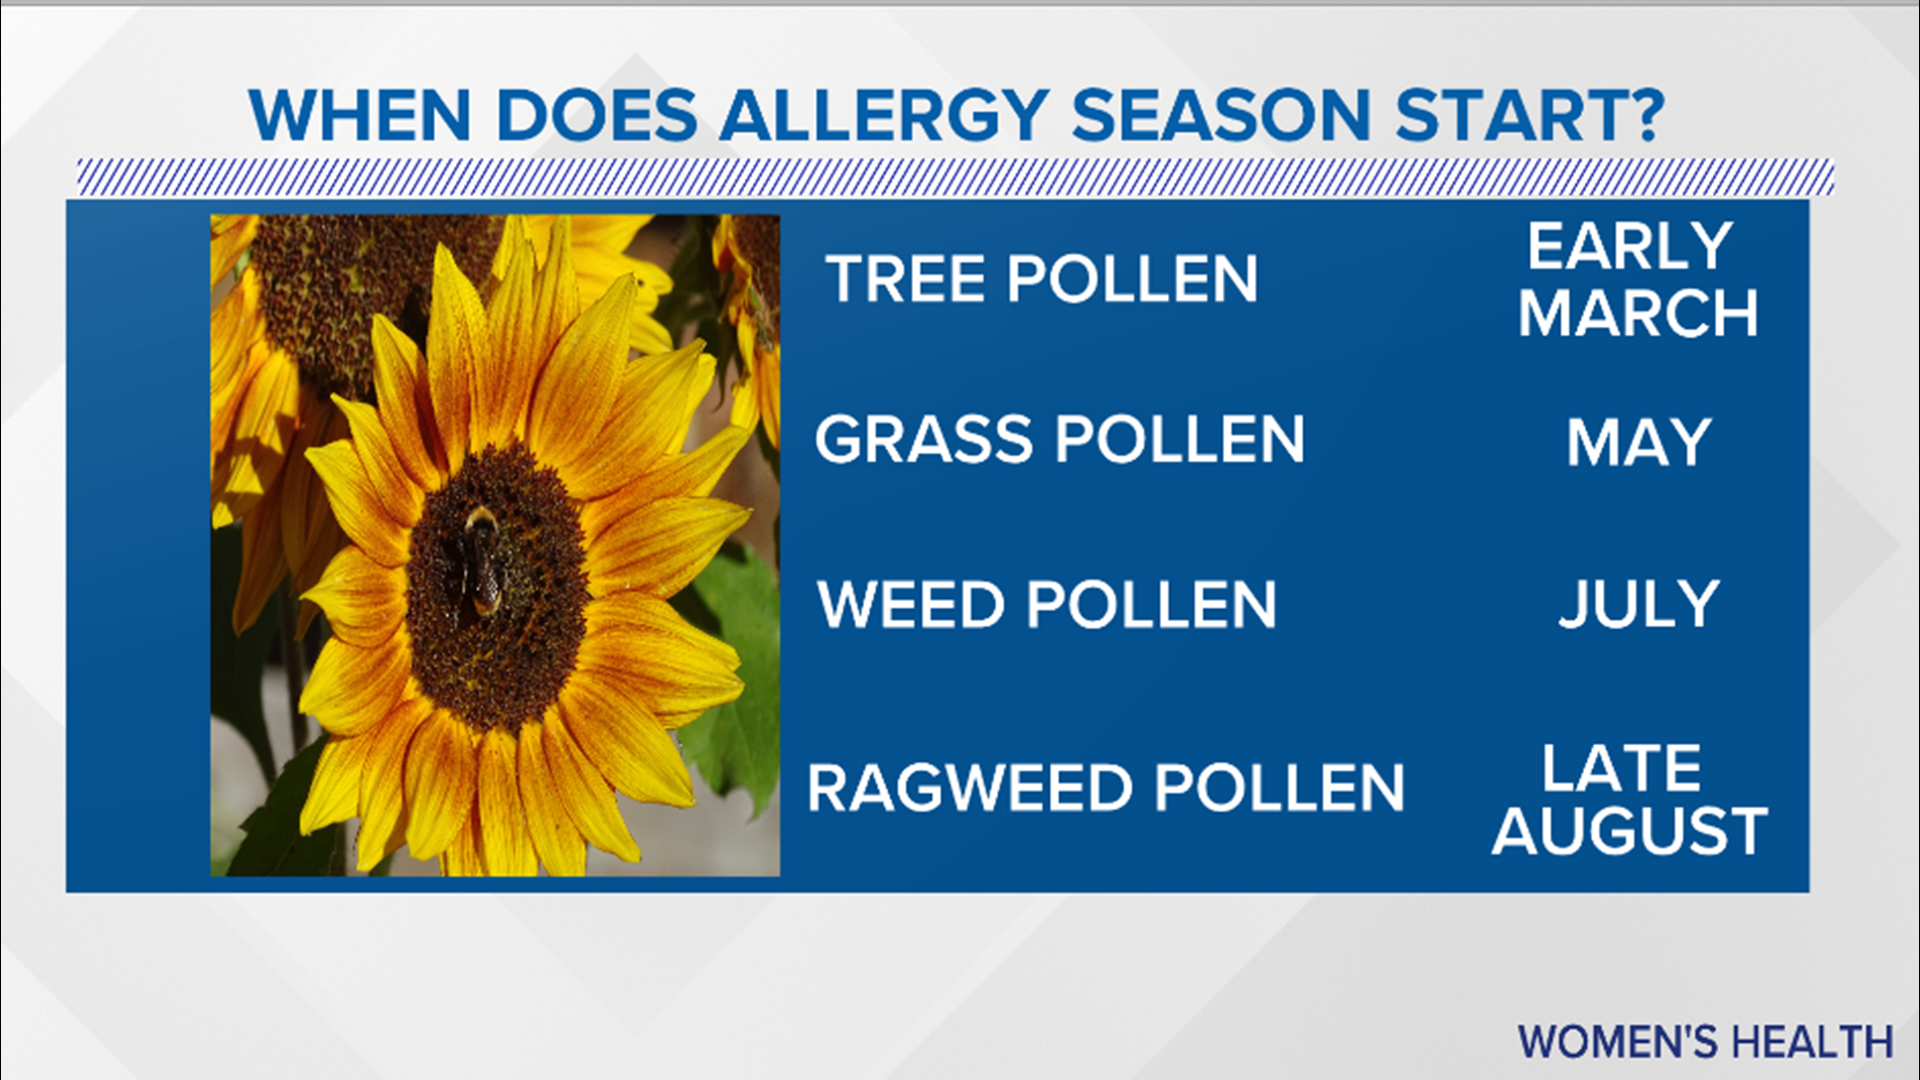 Why is the pollen so bad in Sacramento?